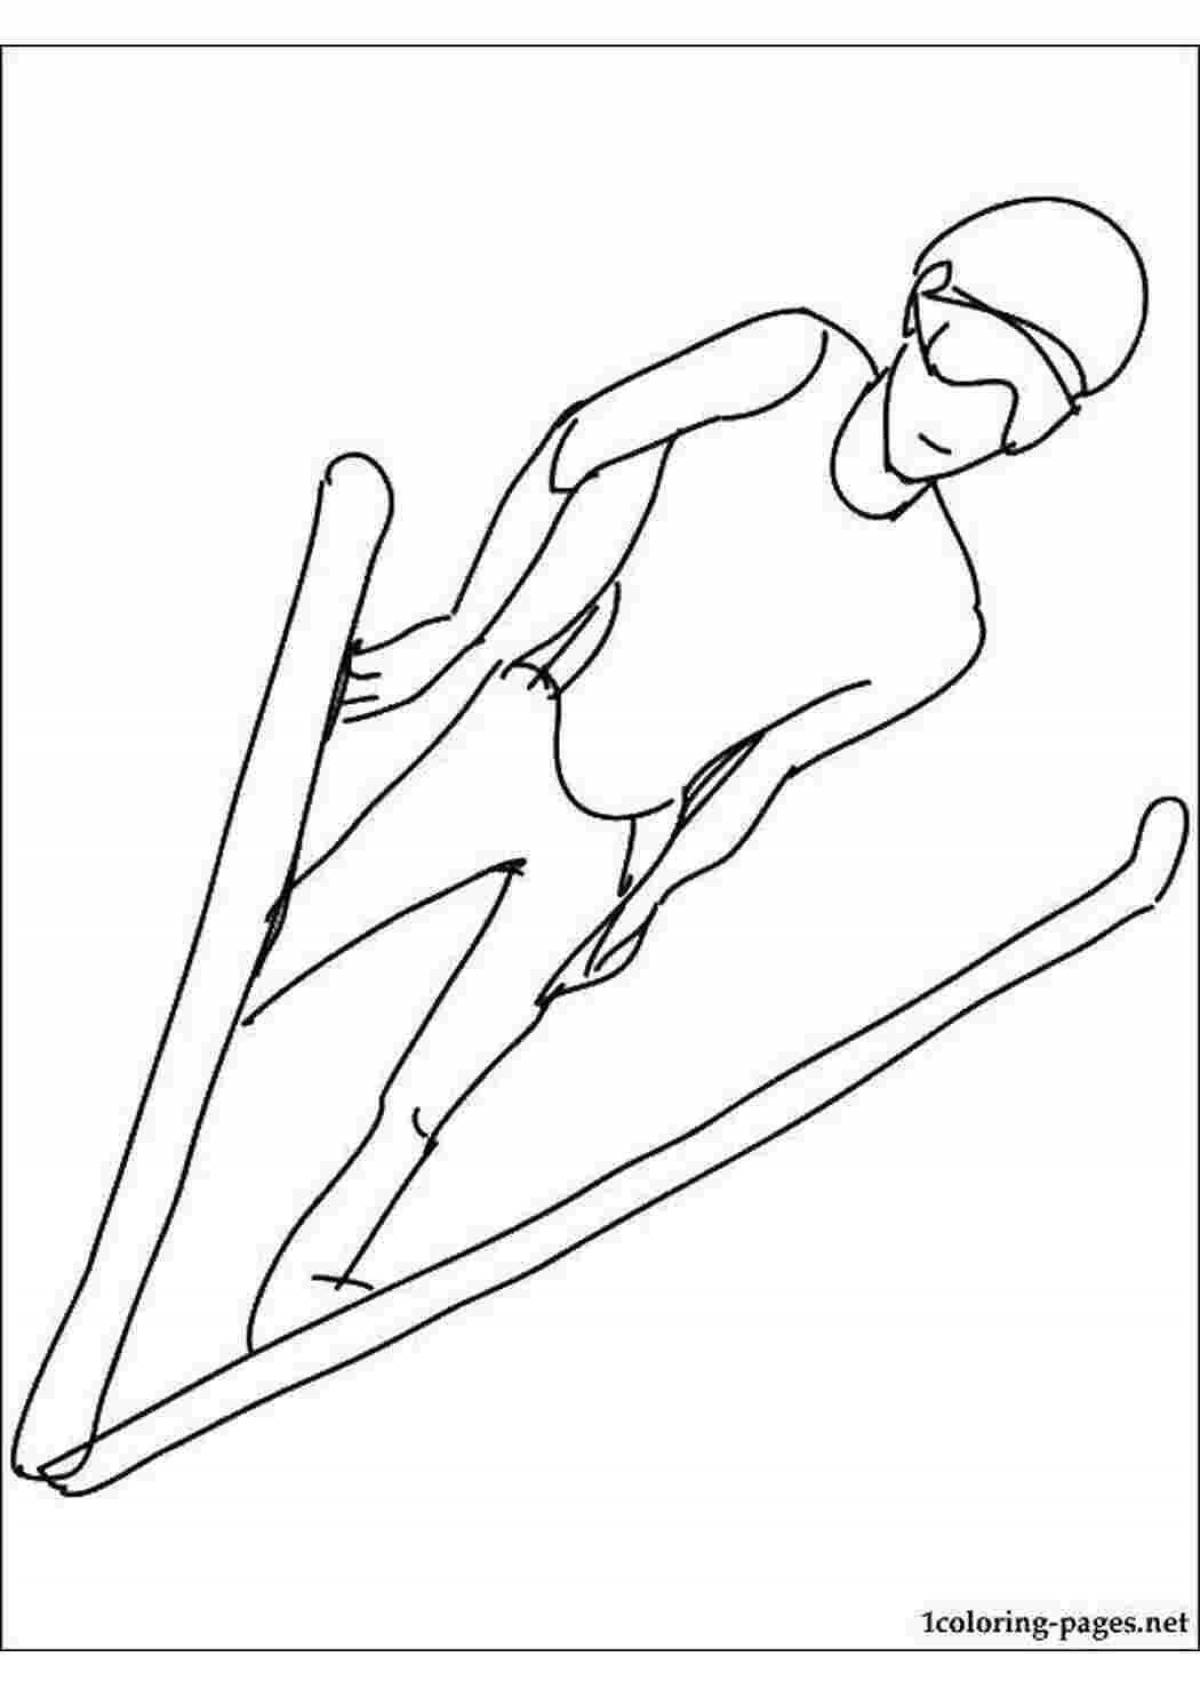 Live skiing coloring page